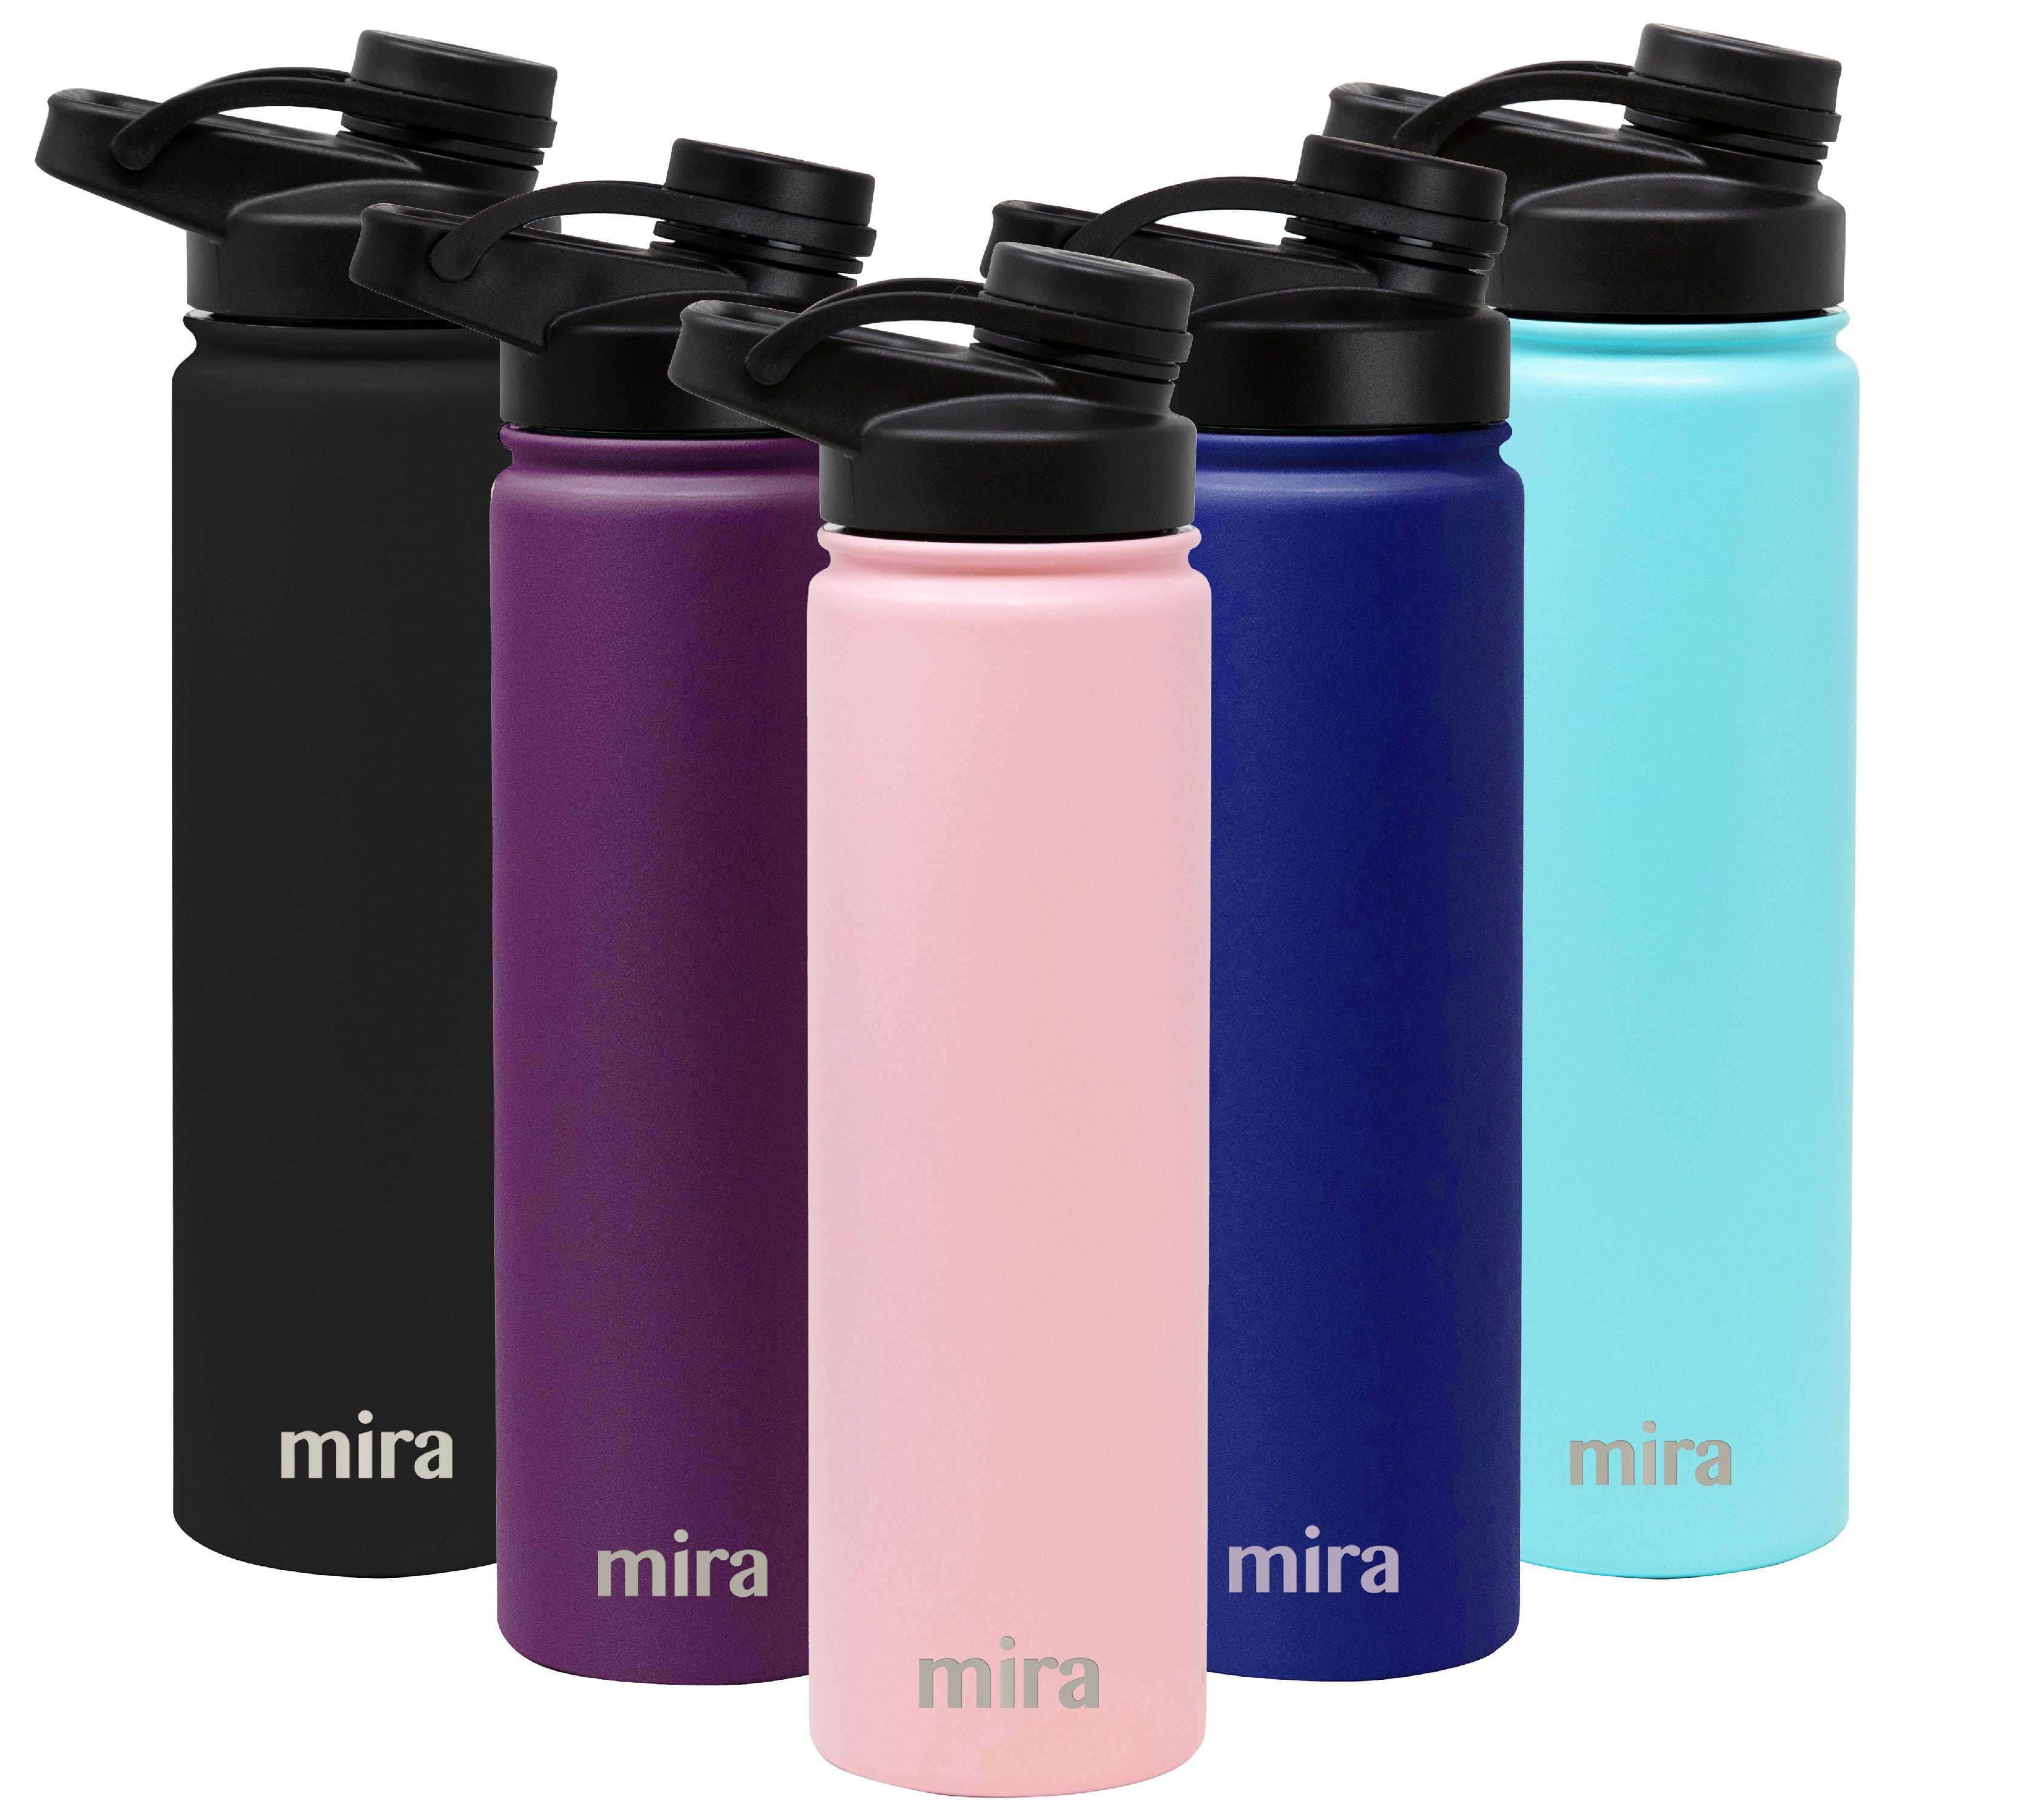 Mira 10 oz Insulated Small Thermos Flask Kids Vacuum Insulated Water Bottle Leak Proof & Spill Proof Taffy Pink